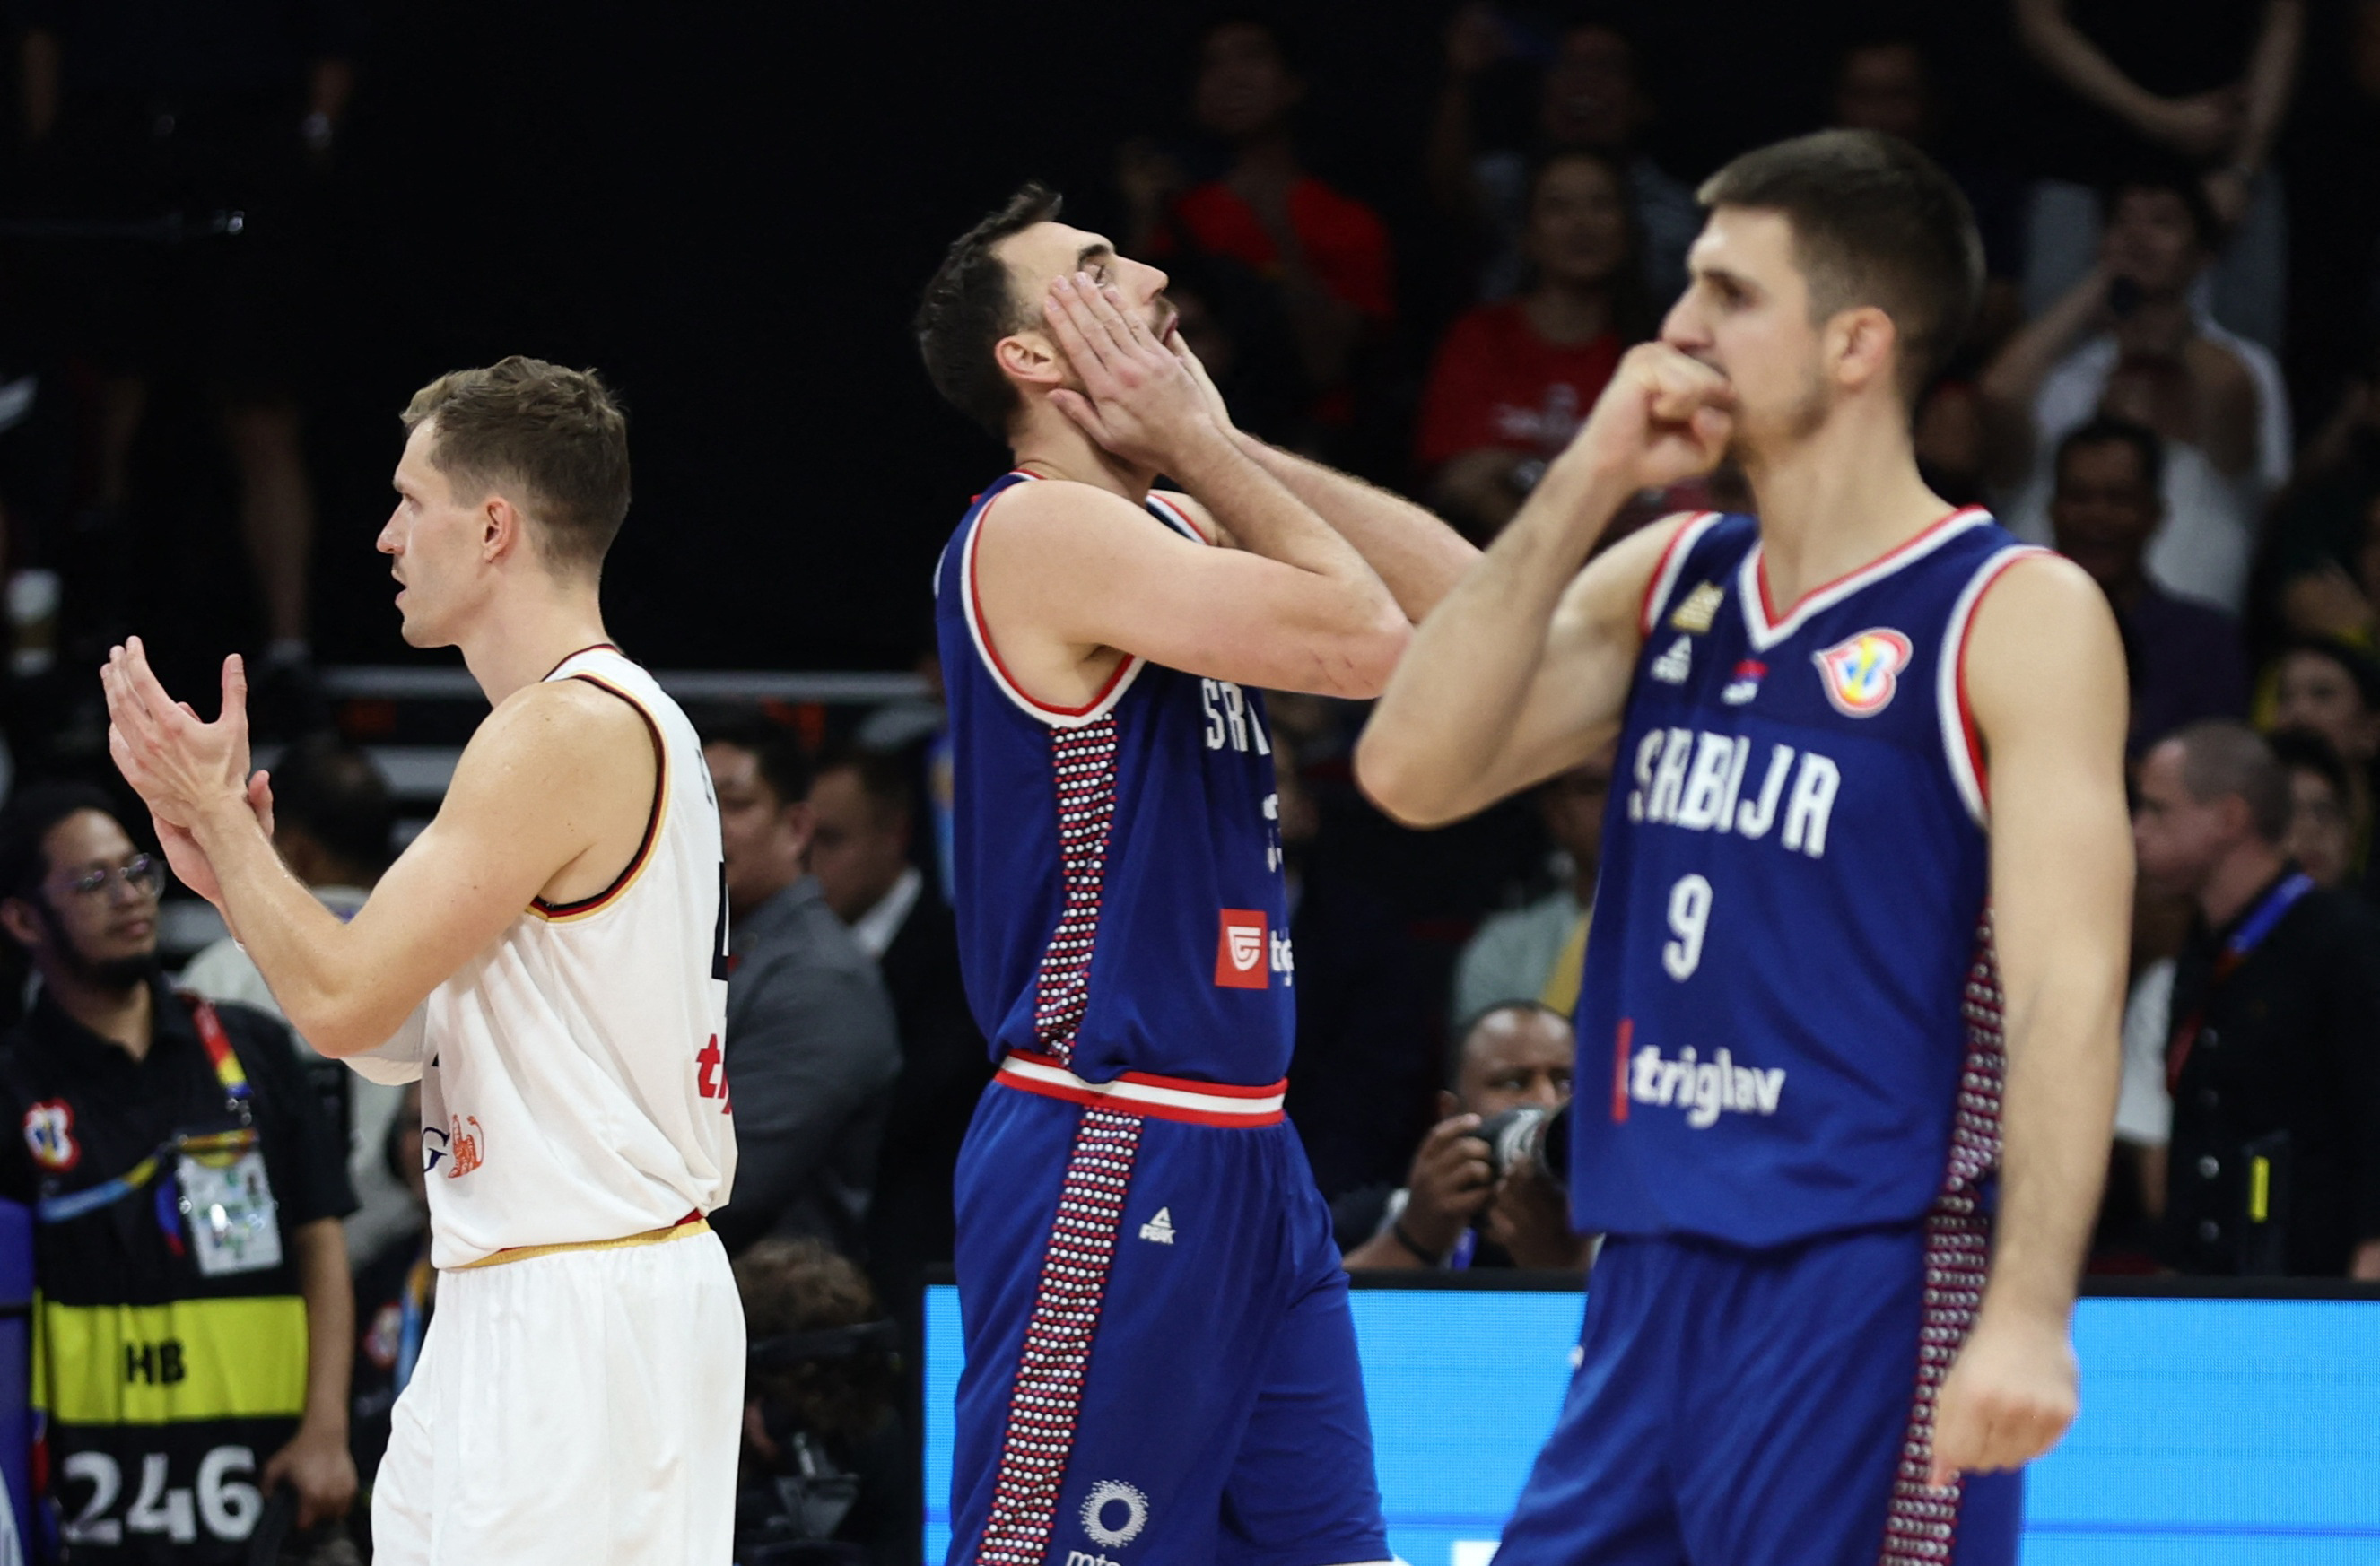 Basketball Germany beat Serbia to win World Cup for first time Reuters